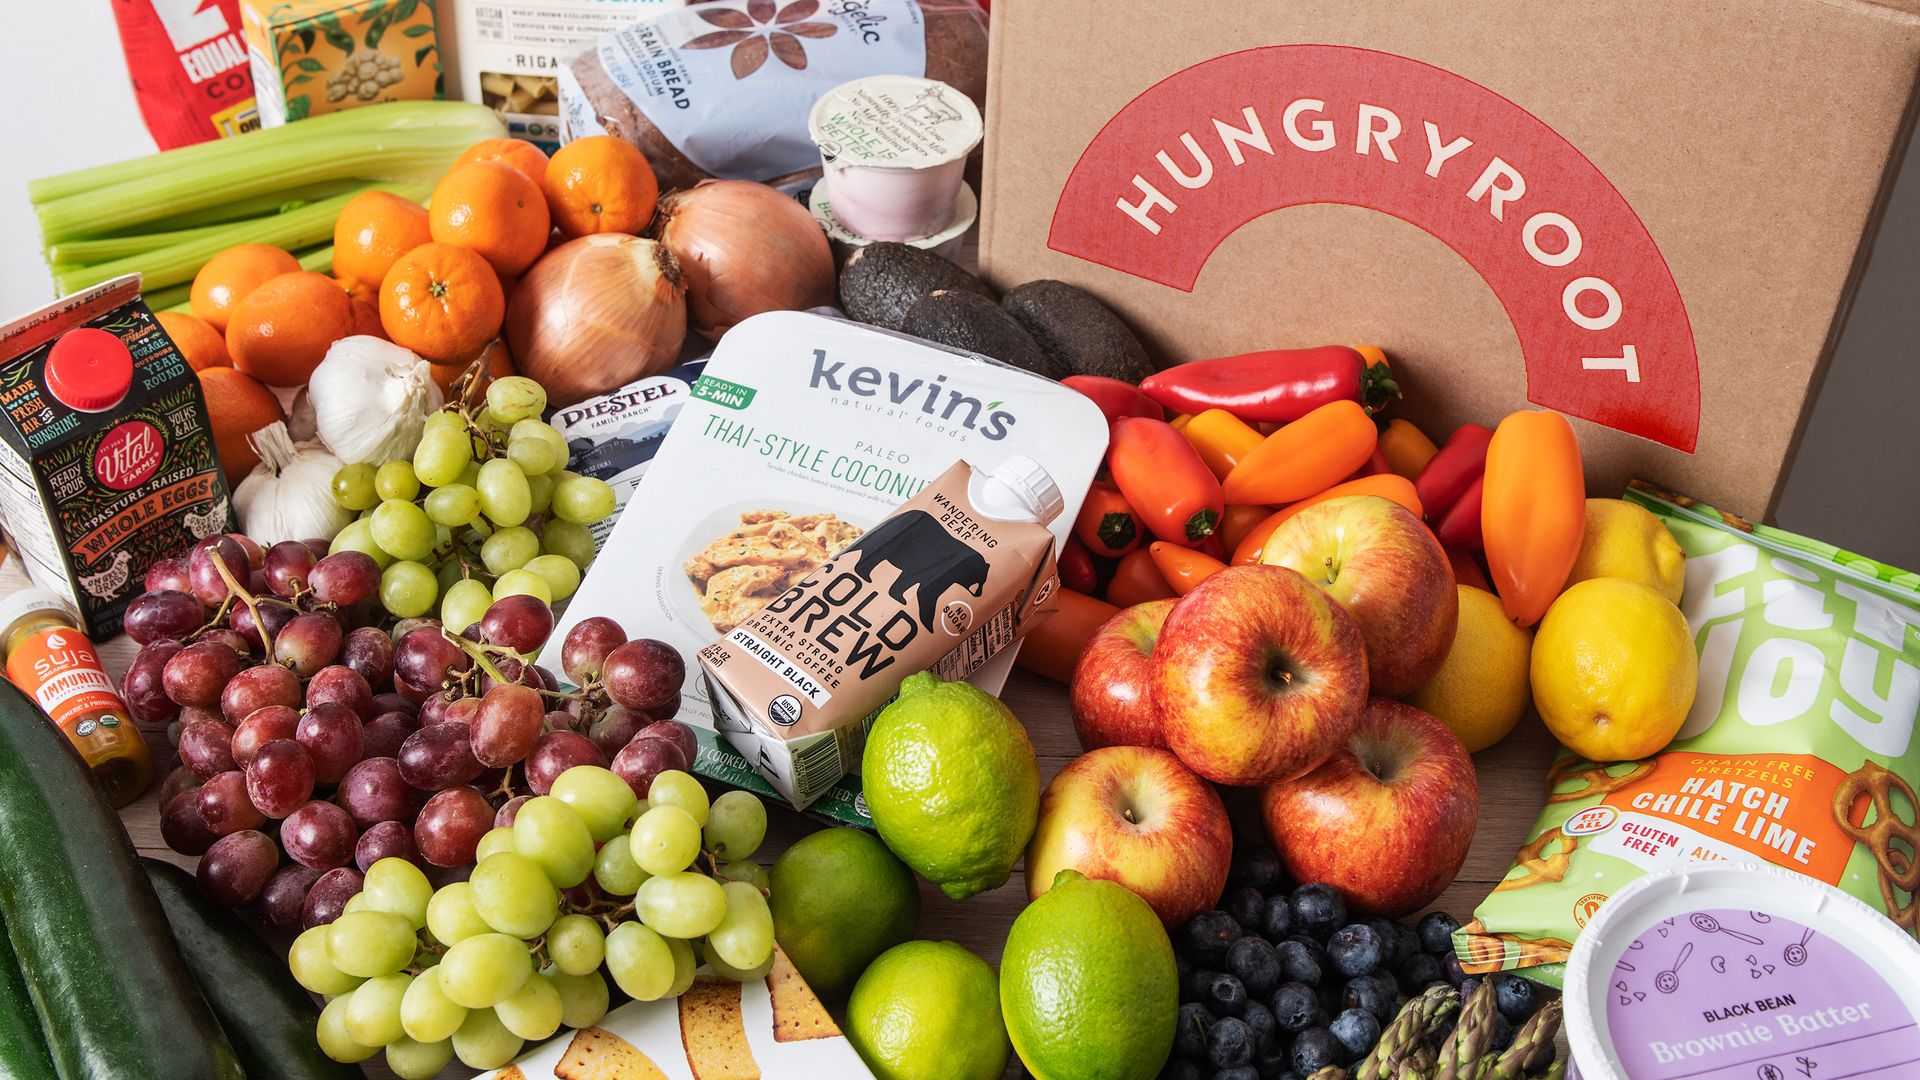 A Hungryroot-branded box surrounded by fruits, vegetables and other groceries.